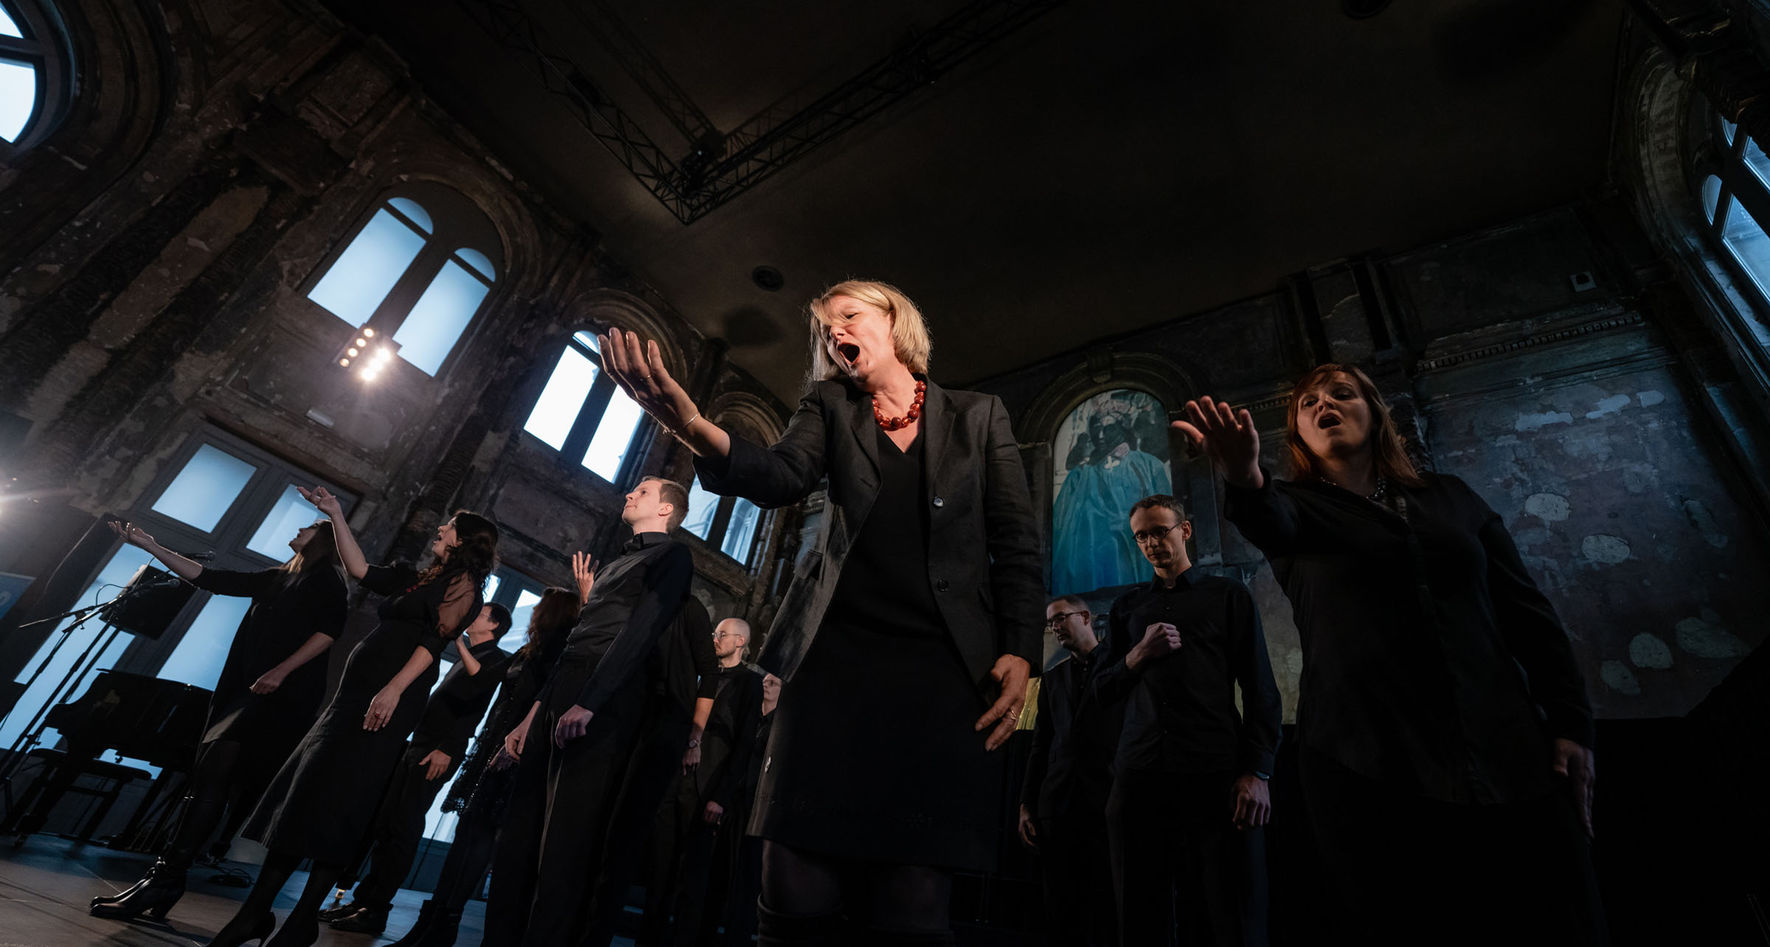 Choir performing on stage © Jonas Persson